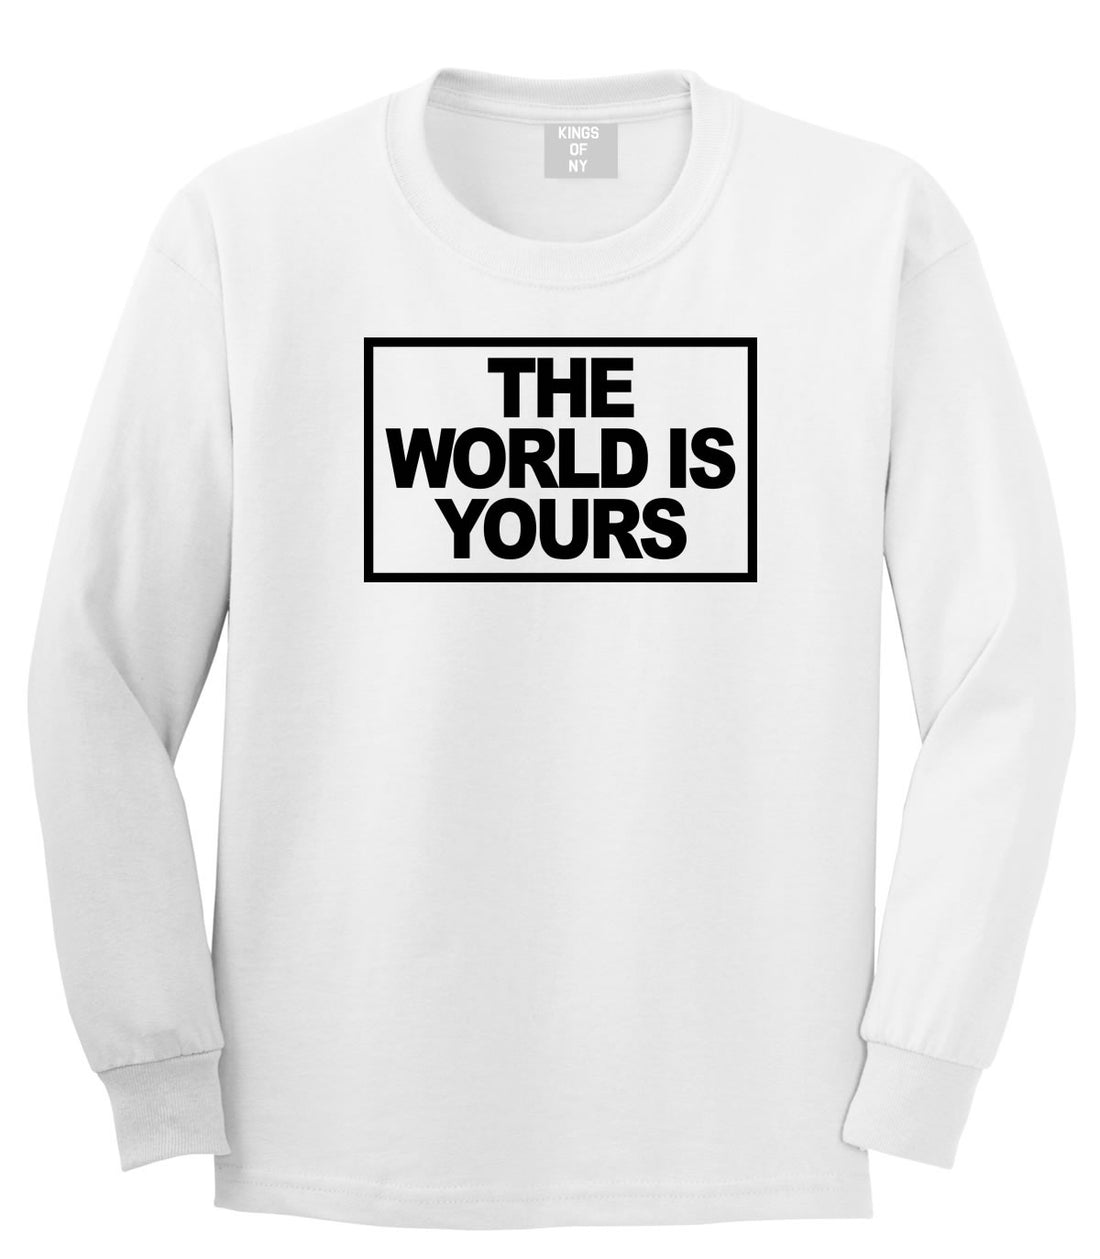 The World Is Yours Long Sleeve T-Shirt in White By Kings Of NY